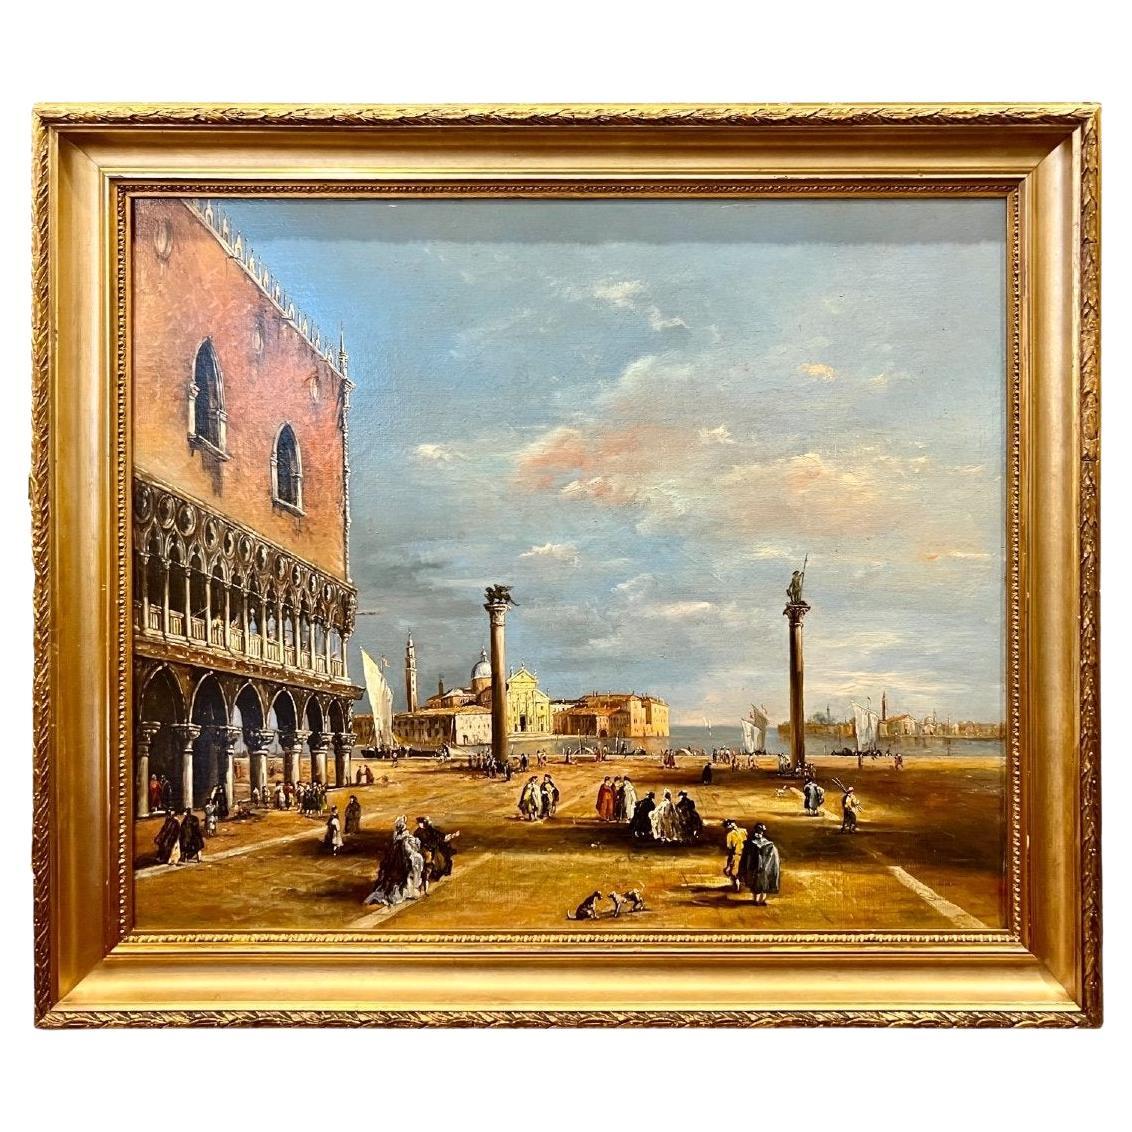 19th Century Oil-on-Canvas Painting of Venice in the Style of Canaletto